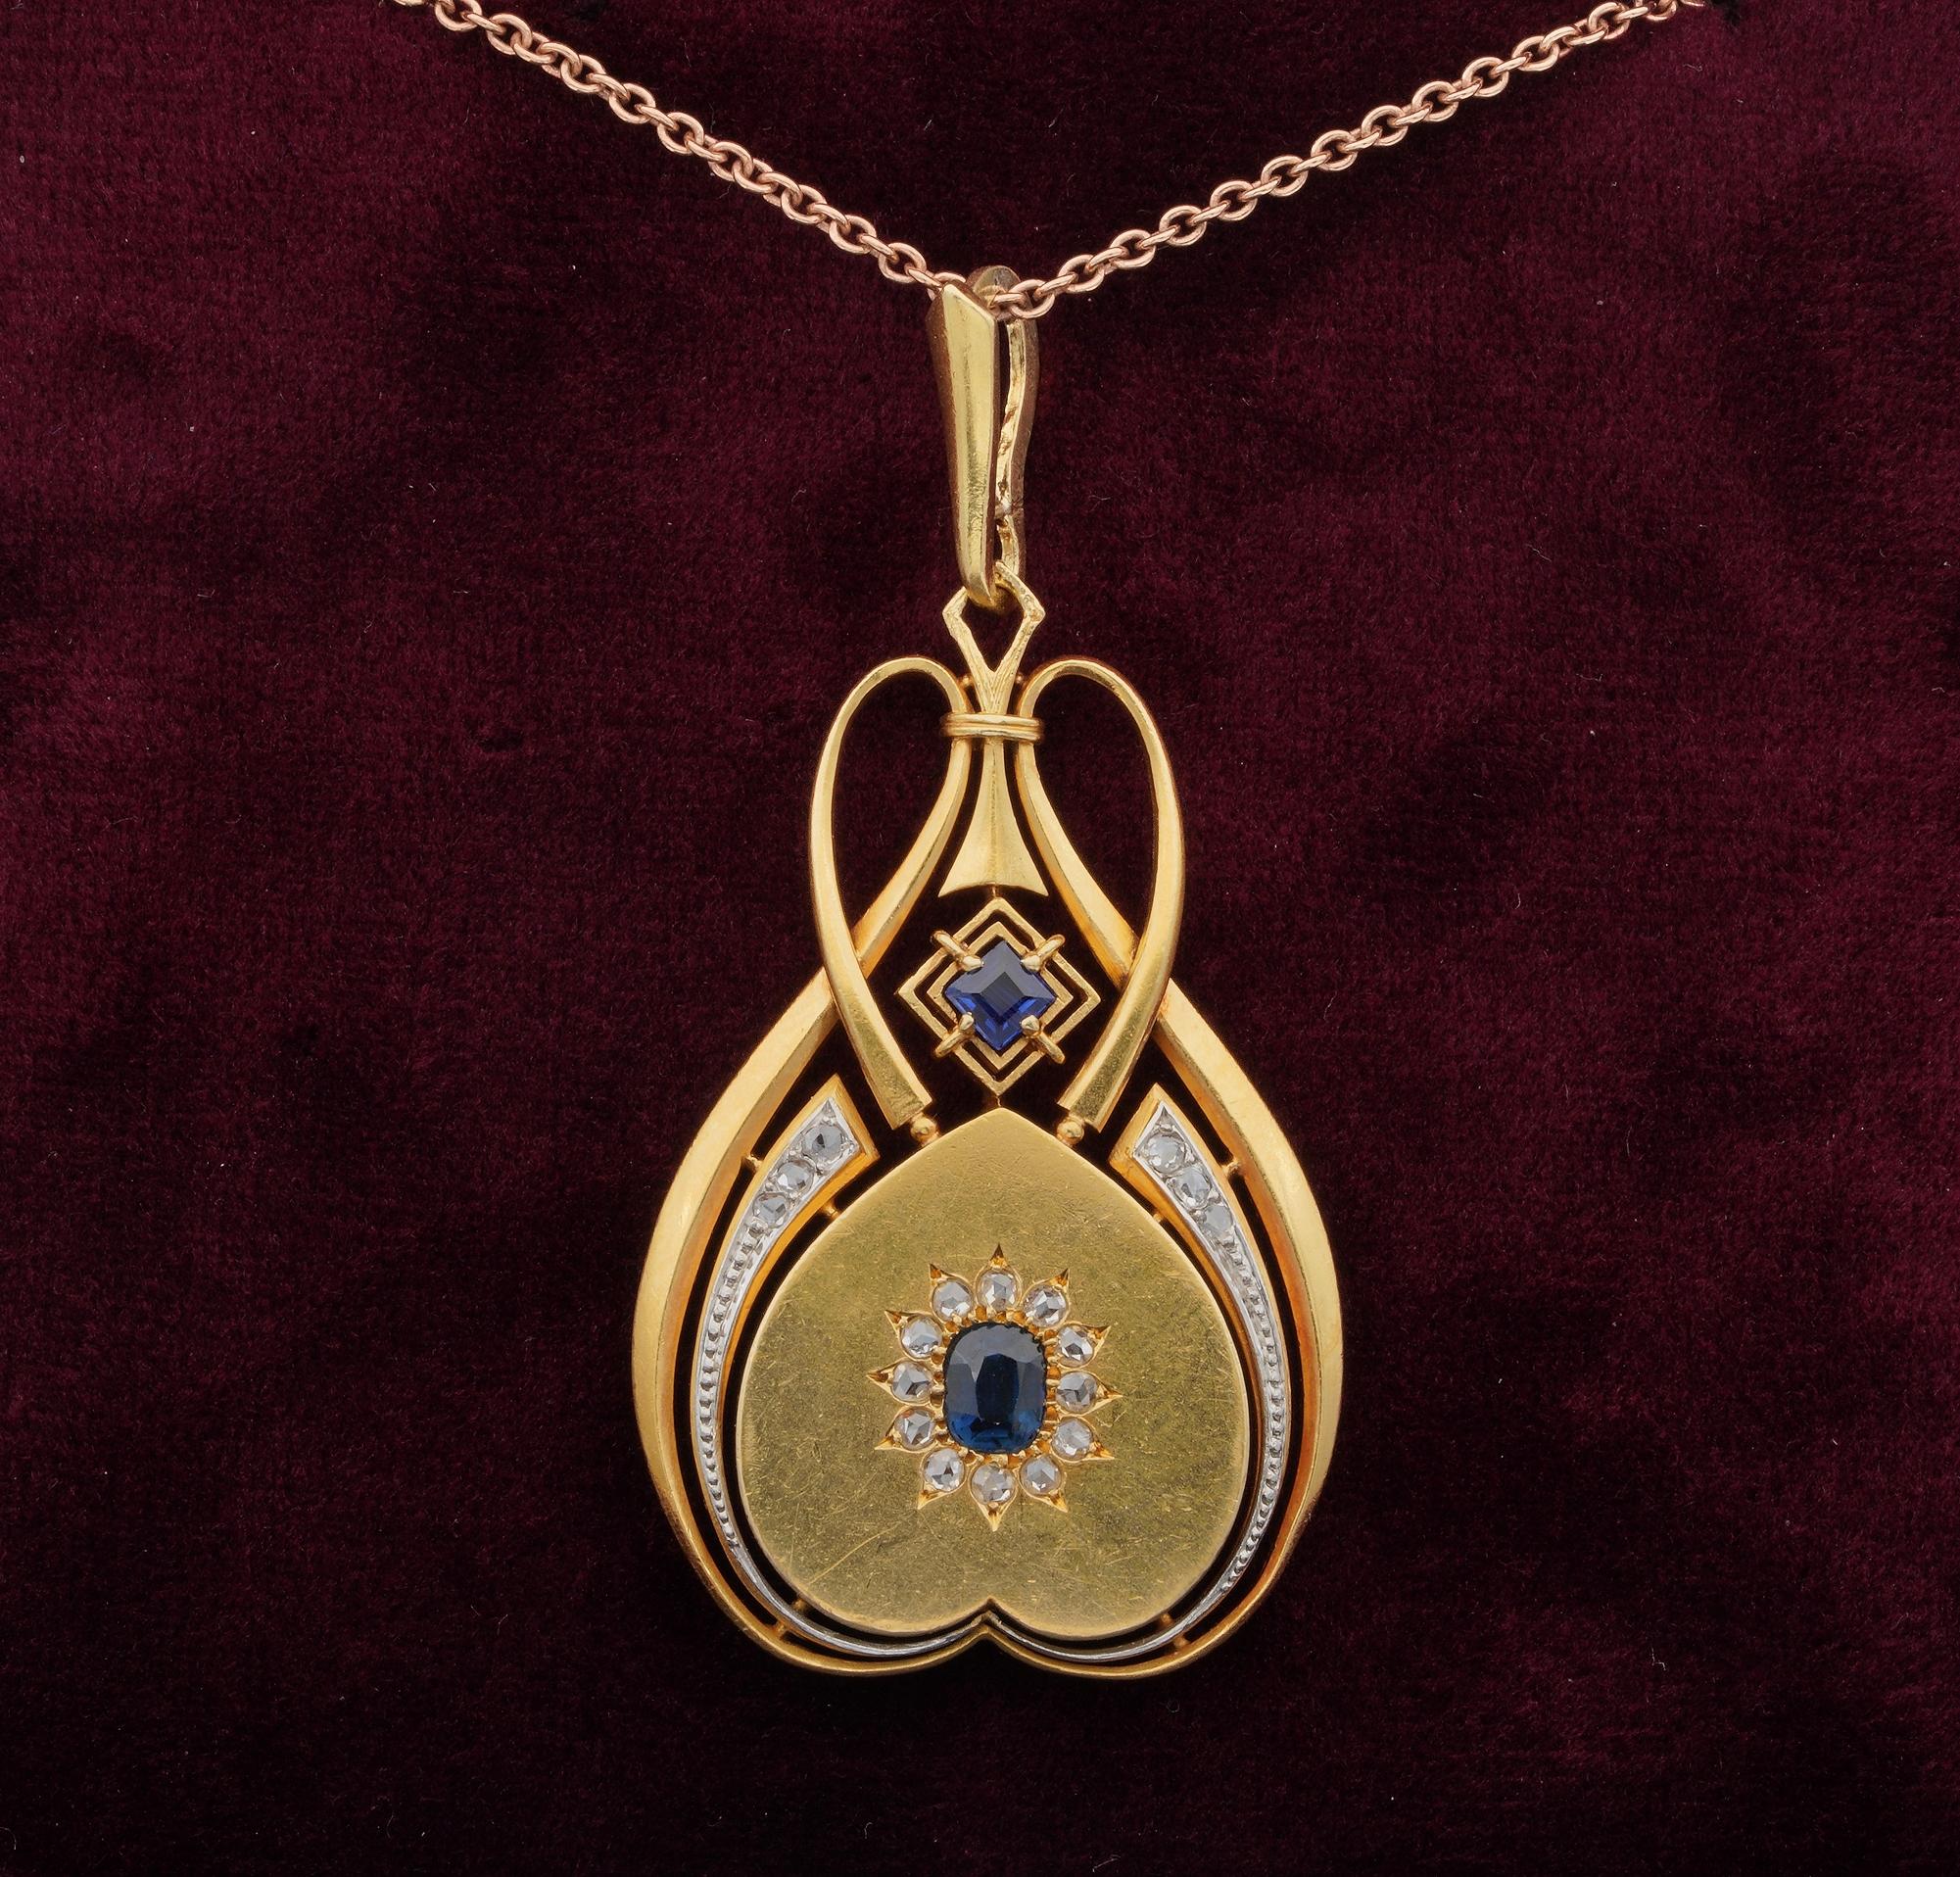 Treasure Keeper

Ravishing Art Nouveau treasure 1890 ca - beautifully hand modelled of solid 18 KT gold
Unusual shape so distinctive of Nouveau, rendered with sinuous lines framing a hearth shaped upside down with a very flat body, keeping the